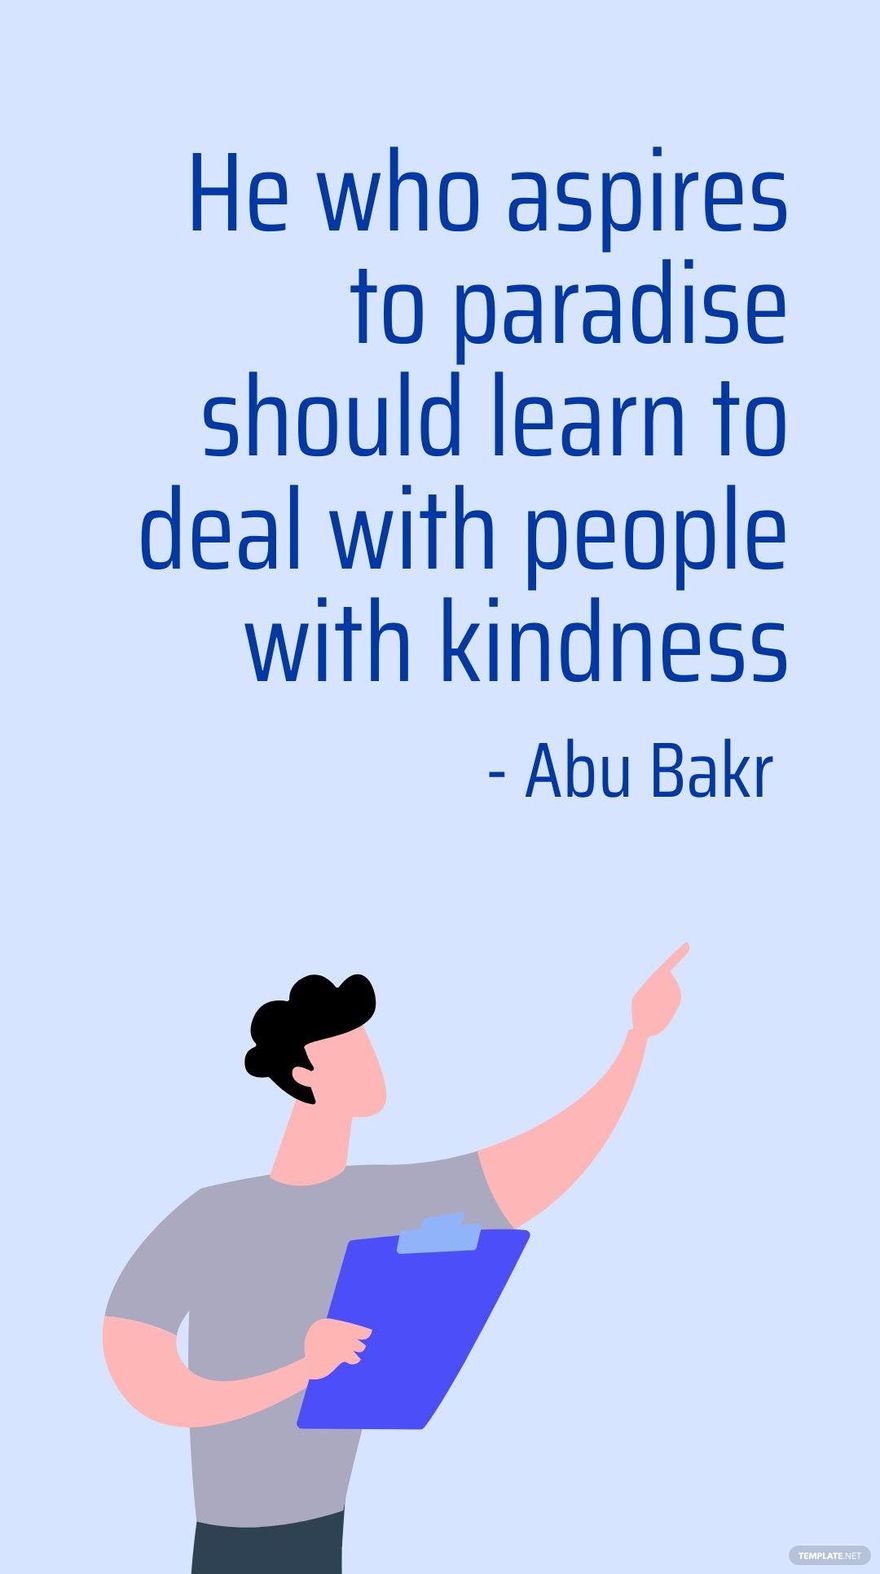 Free Abu Bakr - He who aspires to paradise should learn to deal with people with kindness in JPG